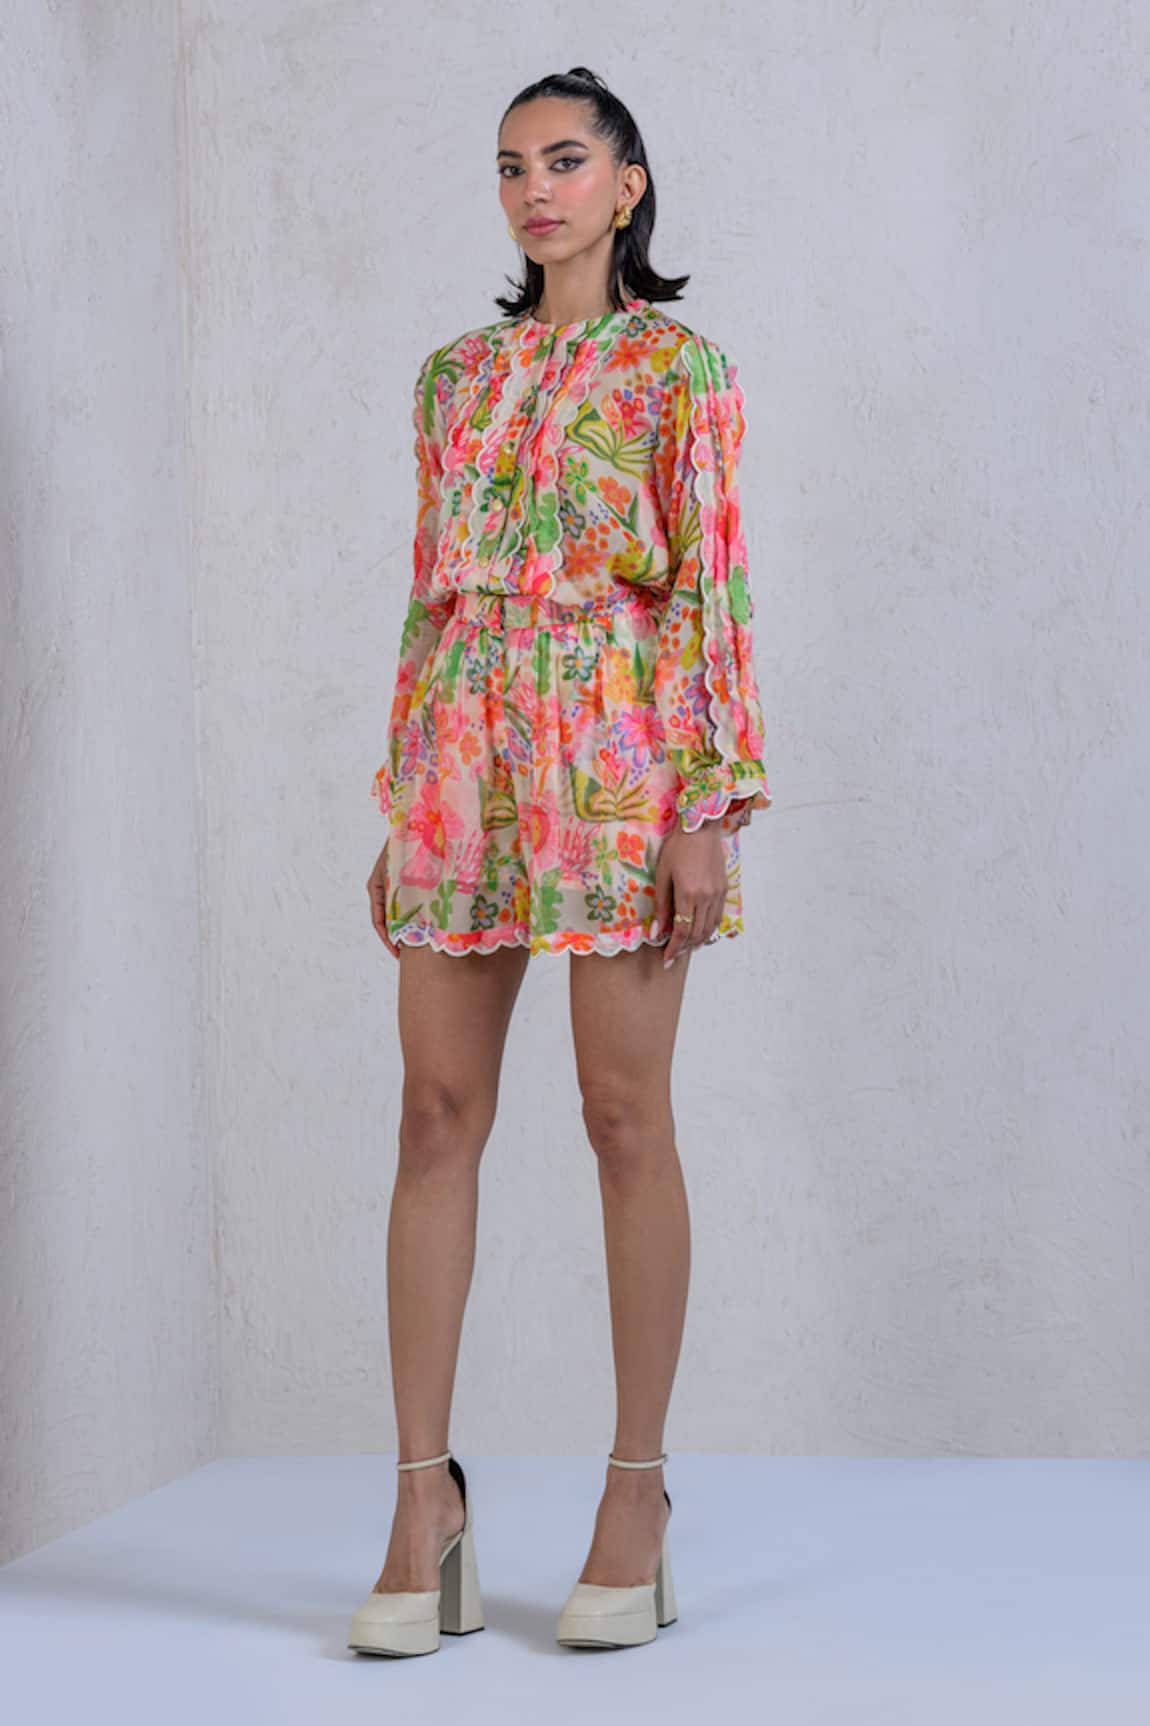 The Dramebaaz Co Whimsy Floral Print Shirt With Shorts